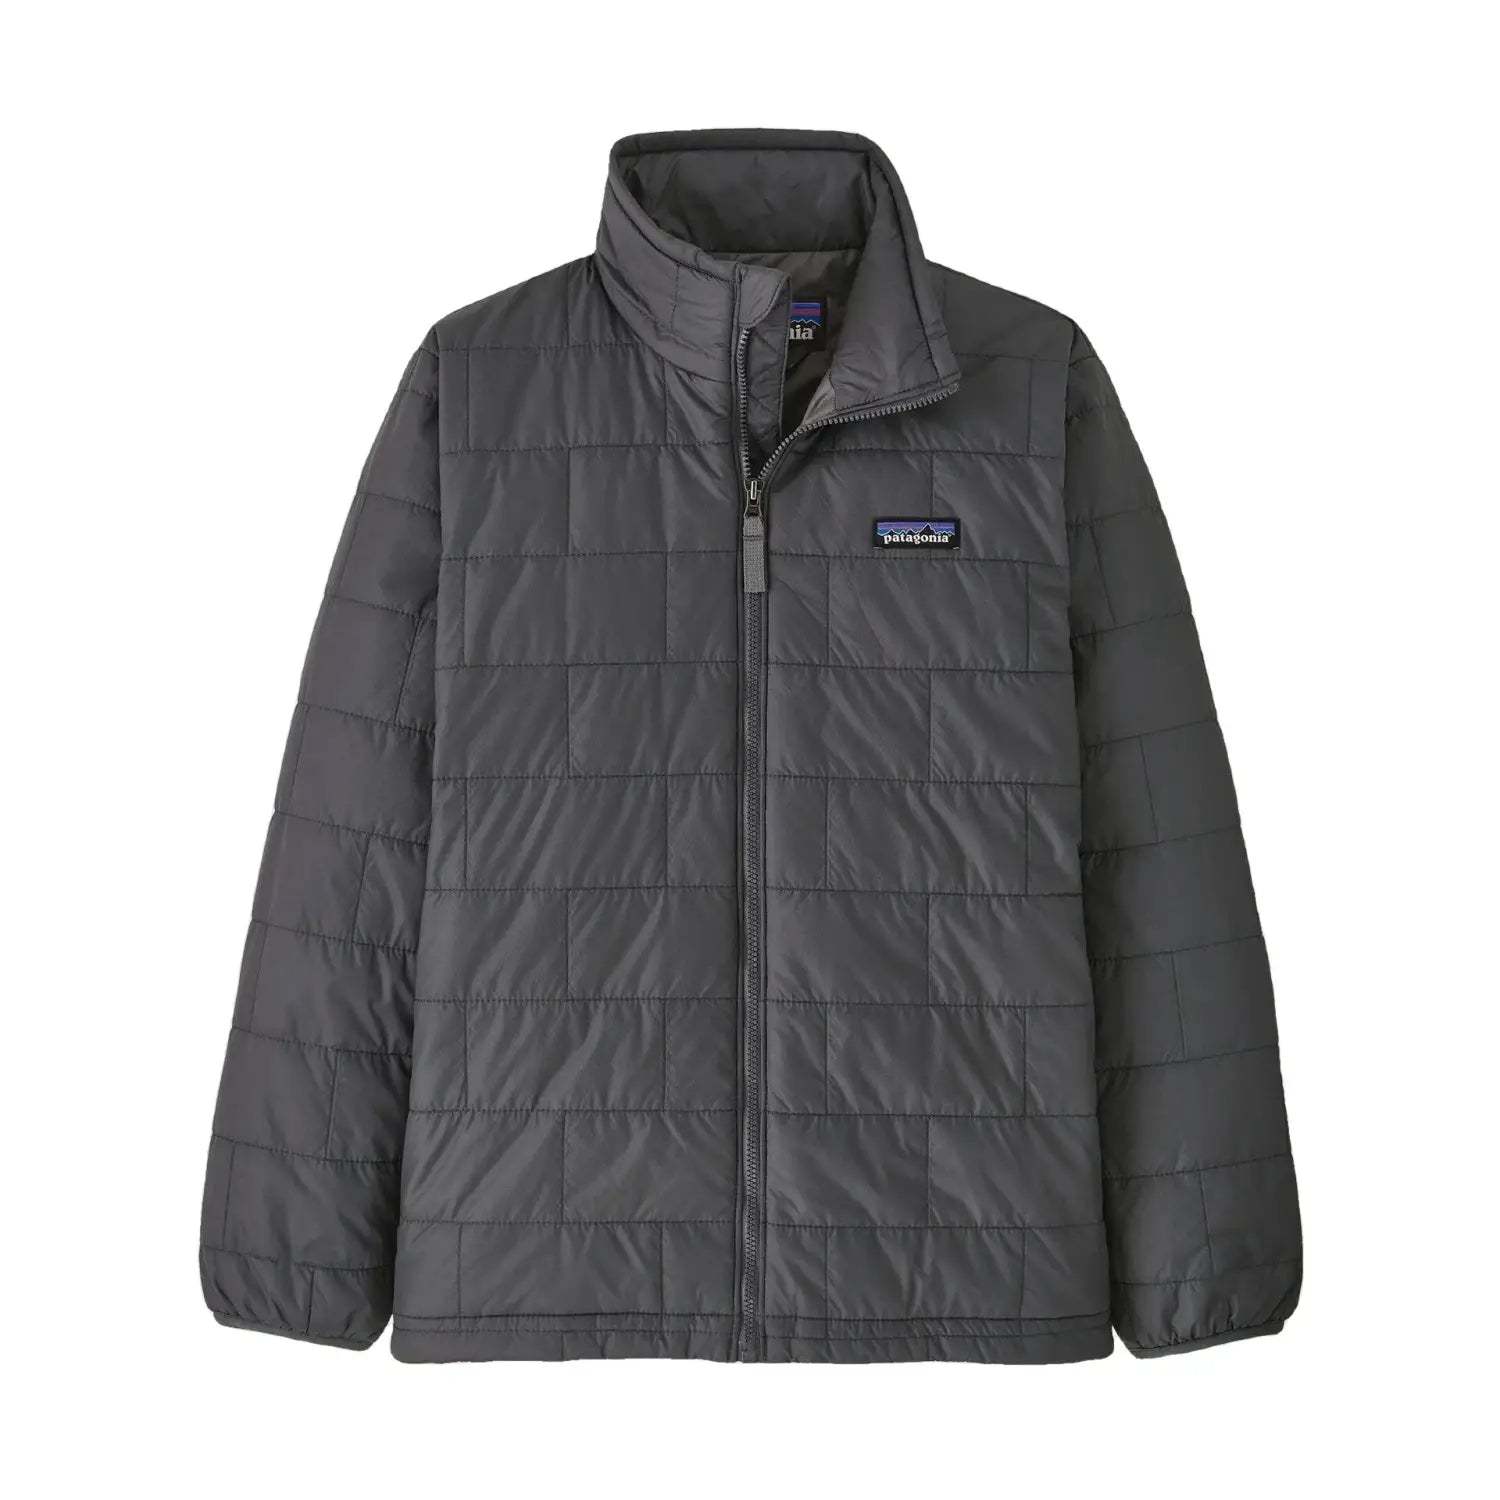 Patagonia Kid's Nano Puff Jacket shown in Forge Grey w/Noble Grey. Front view with Patagonia logo.